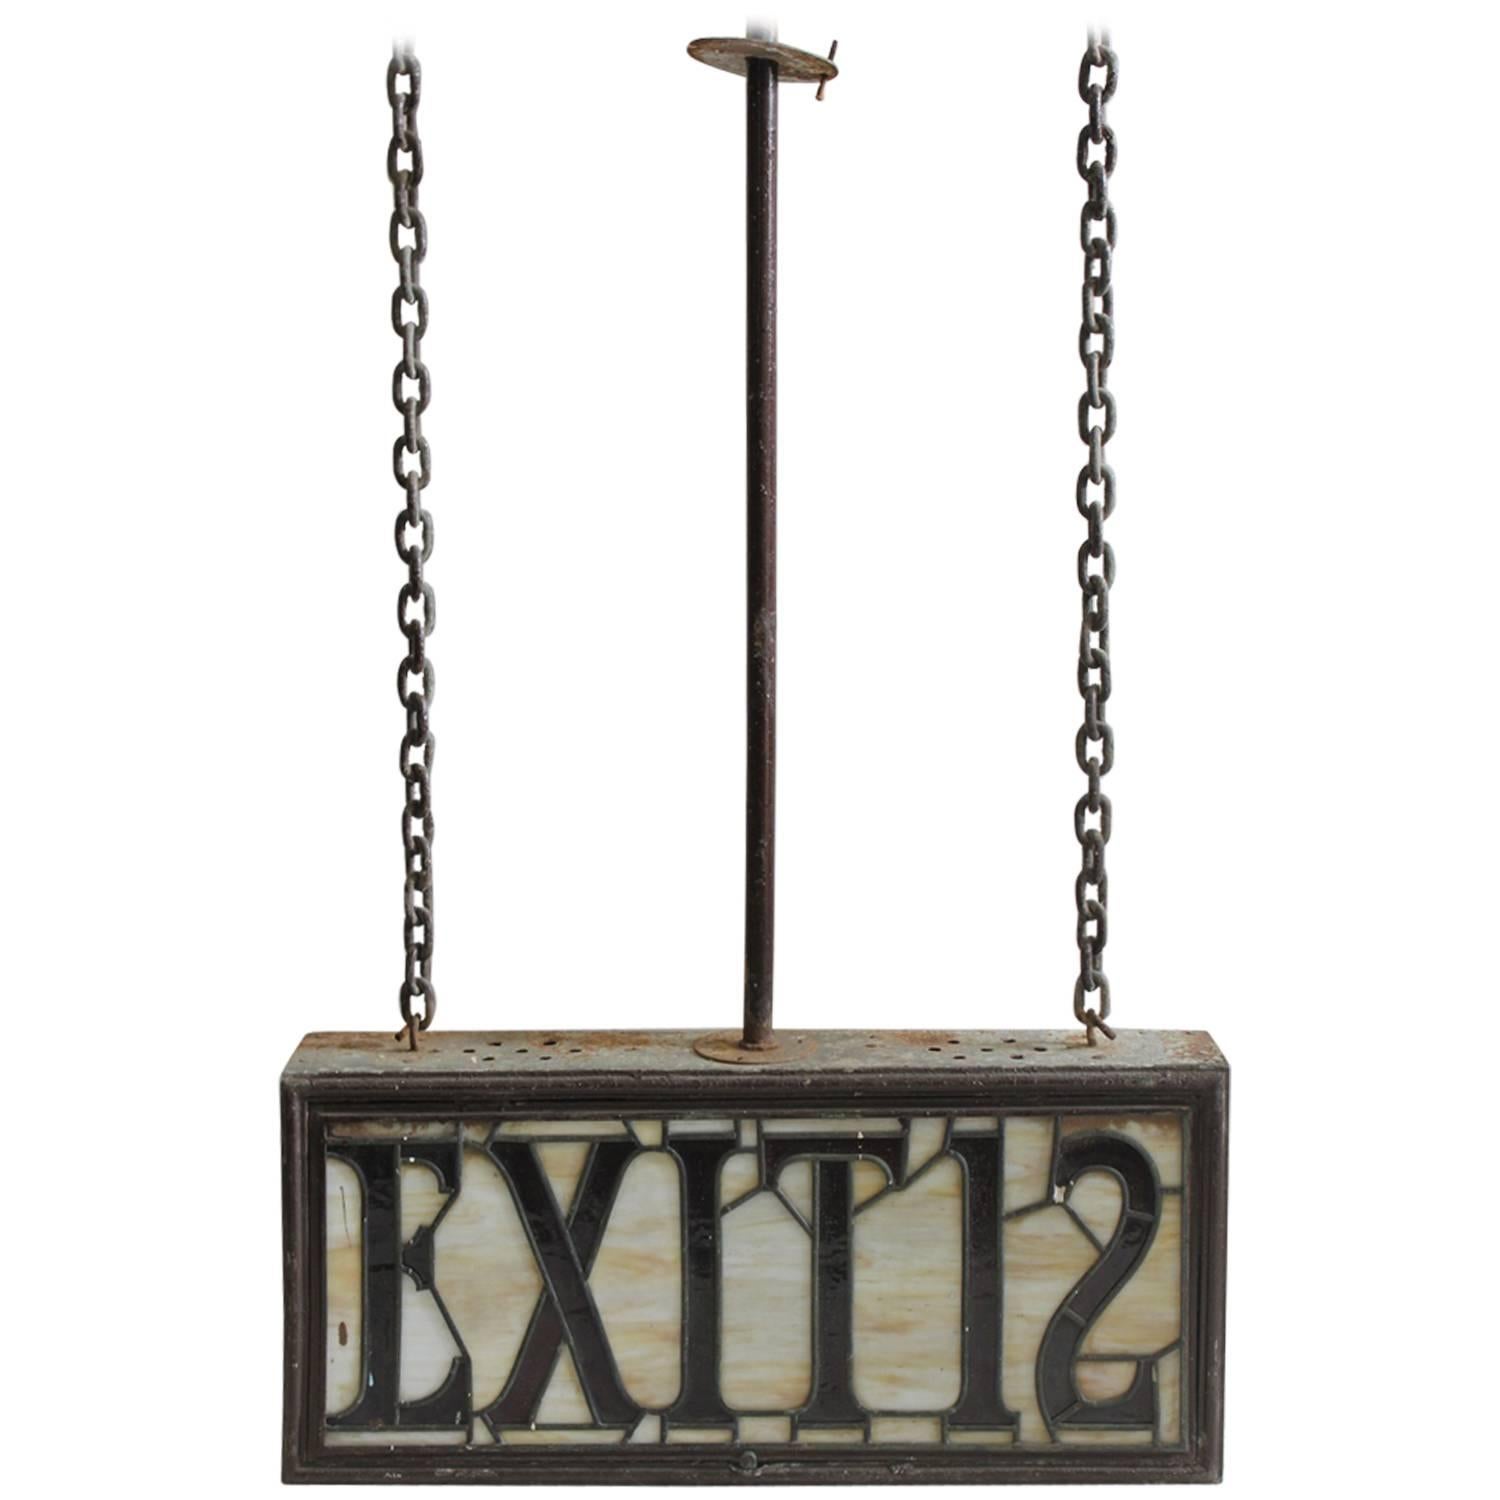 Large Antique Light Up Stained Glass EXIT 12 Sign